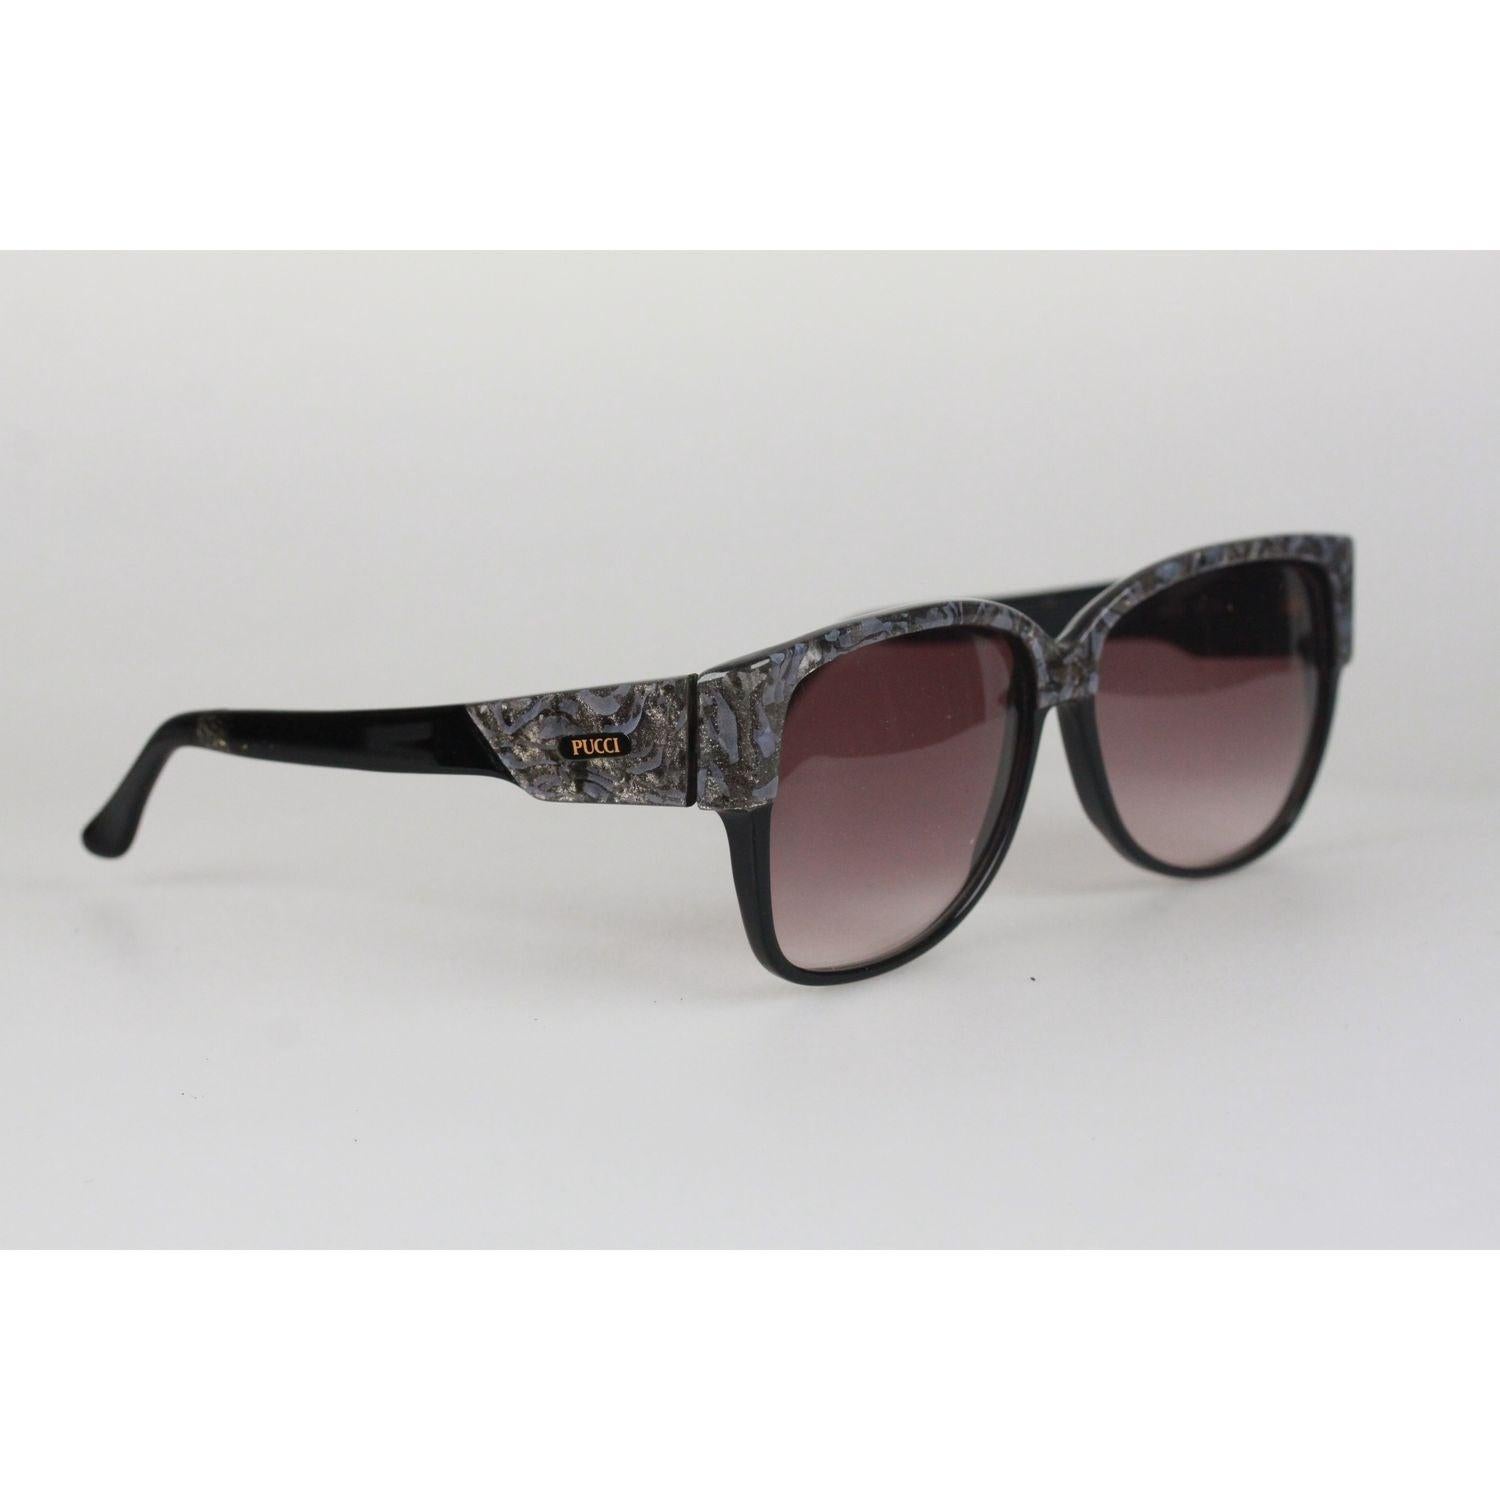 Elegant and Stylish Vintage EMILIO PUCCI Sunglasses Black Acetate frame with Marbled effect - finish on the top. Hand Made in France. Grey Gradient 100% UV lens. New Old Stock - Never Worn. Details MATERIAL: Plastic COLOR: Black MODEL: EP75 GENDER: